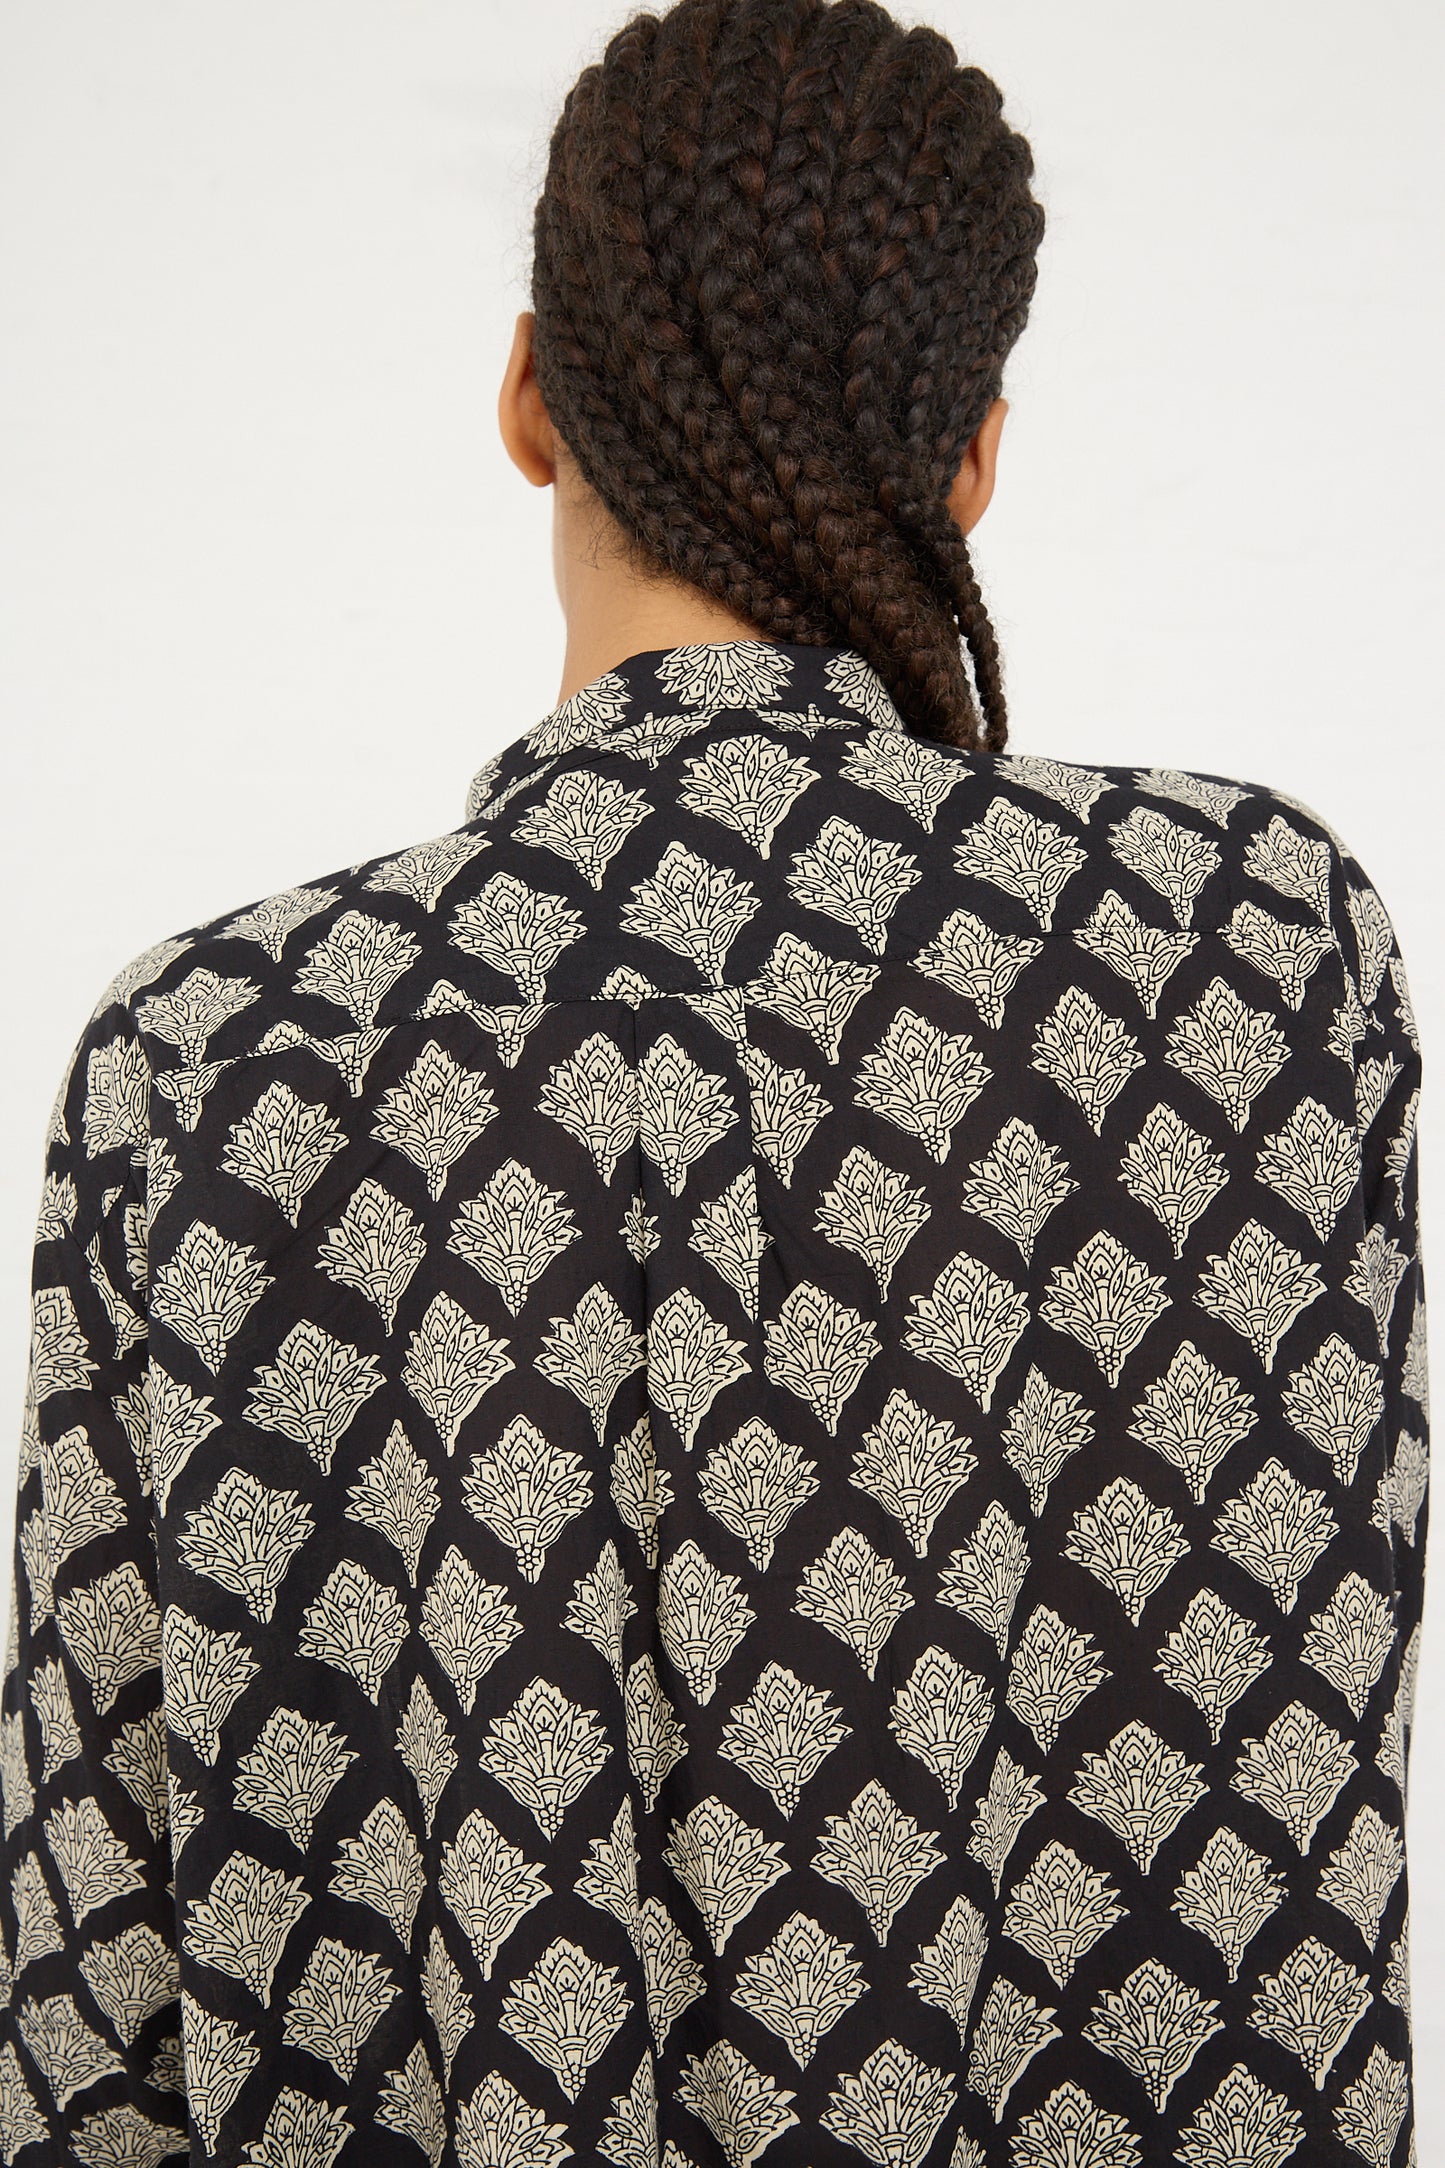 A person seen from behind wearing an Ichi Antiquités Woven Cotton Indian Block Print Dress in Black, with hair braided into thick cornrows.